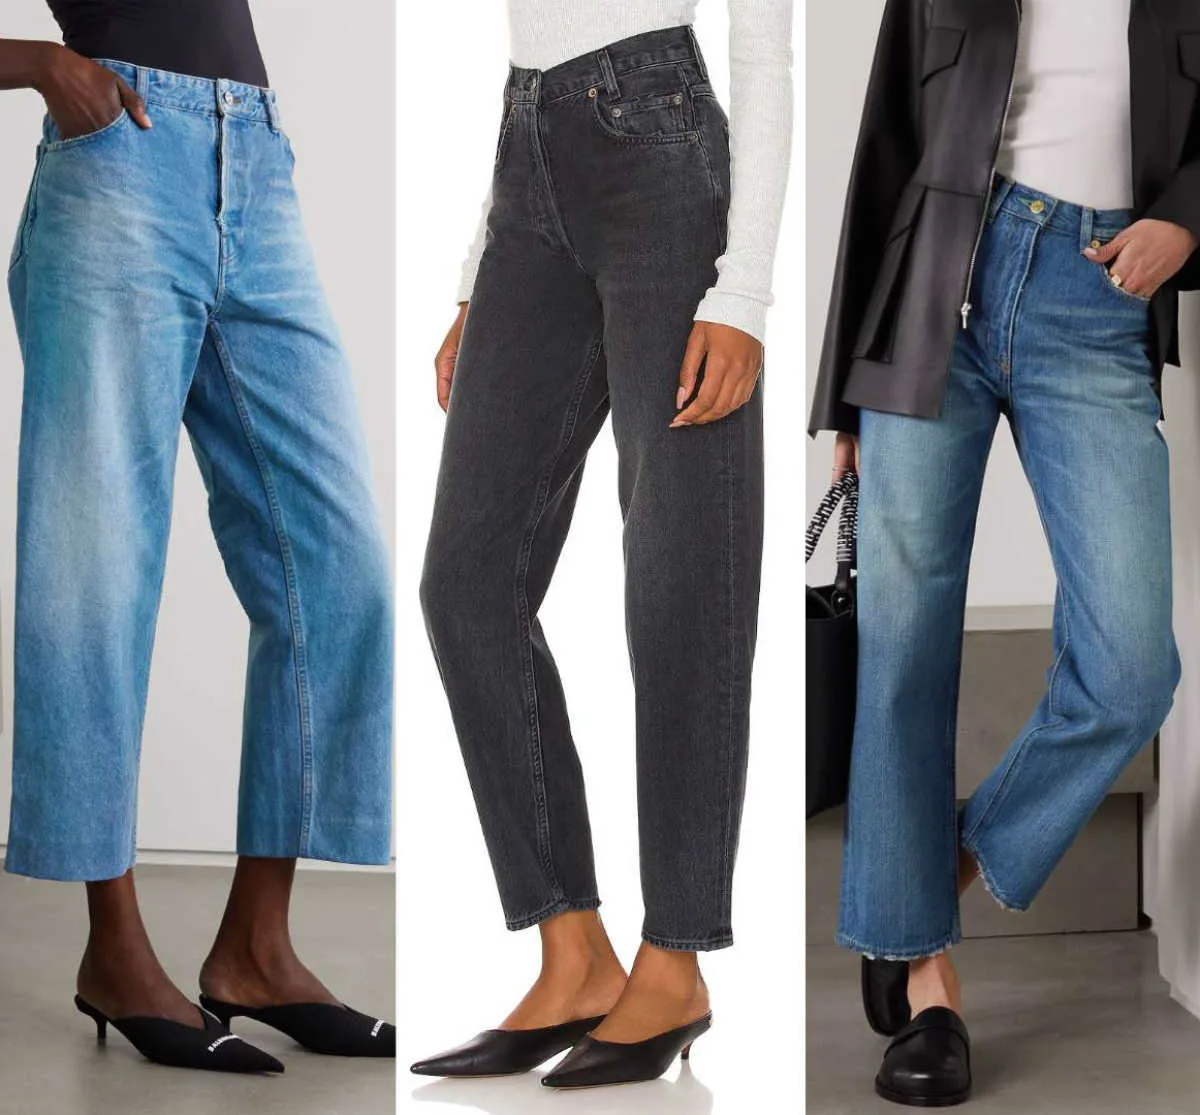 3 women wearing different mules shoes with wide leg jeans.